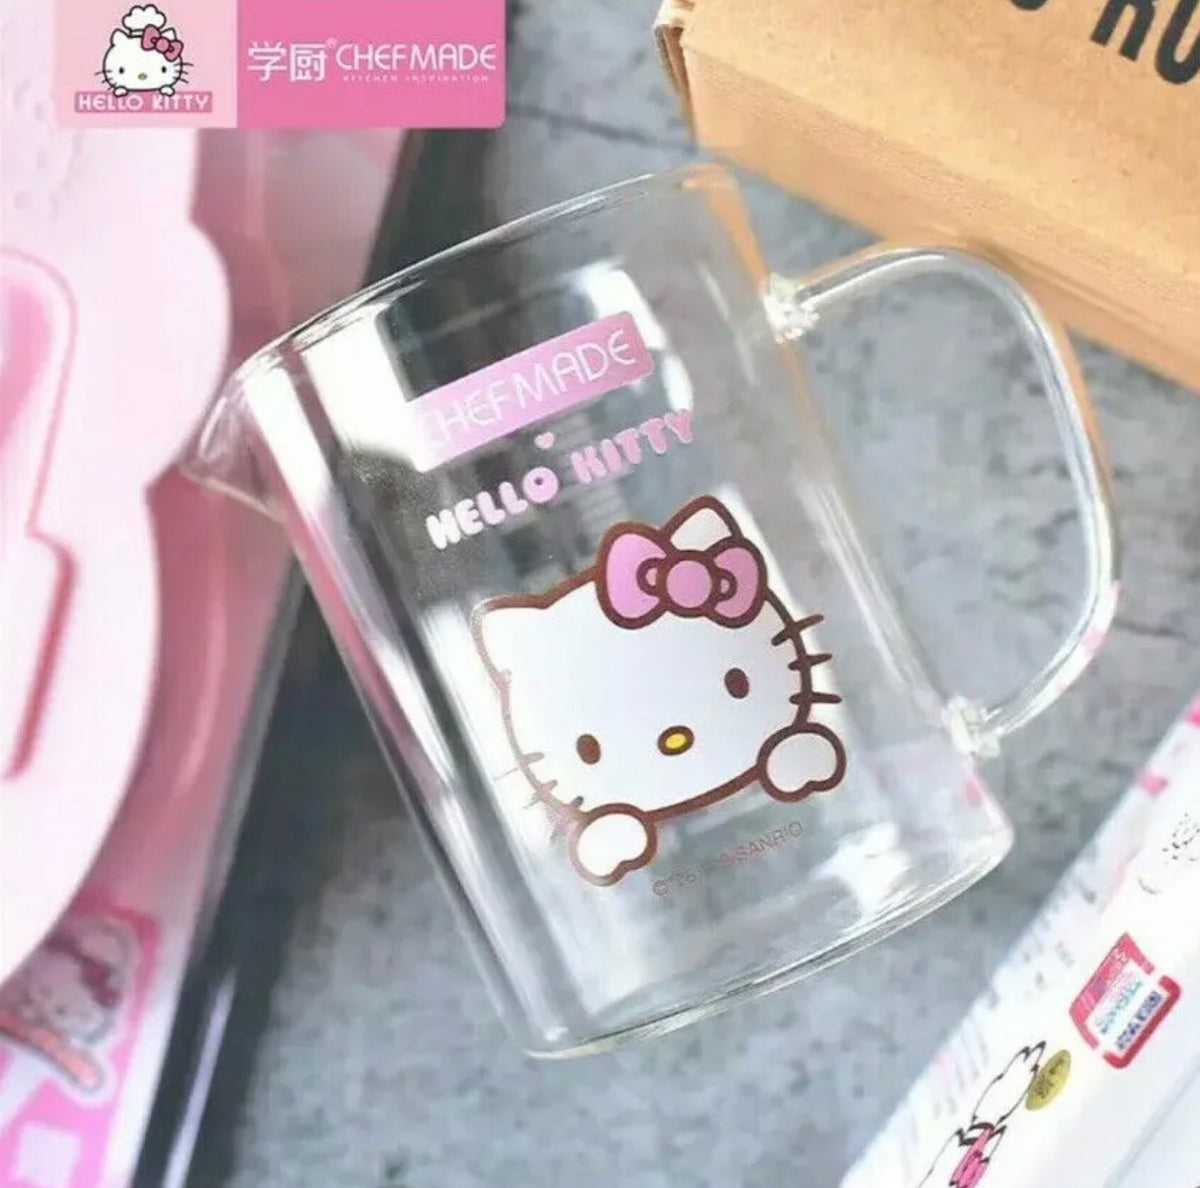 for Hello kitty Pyrex measuring cup - Measuring Cups & Spoons